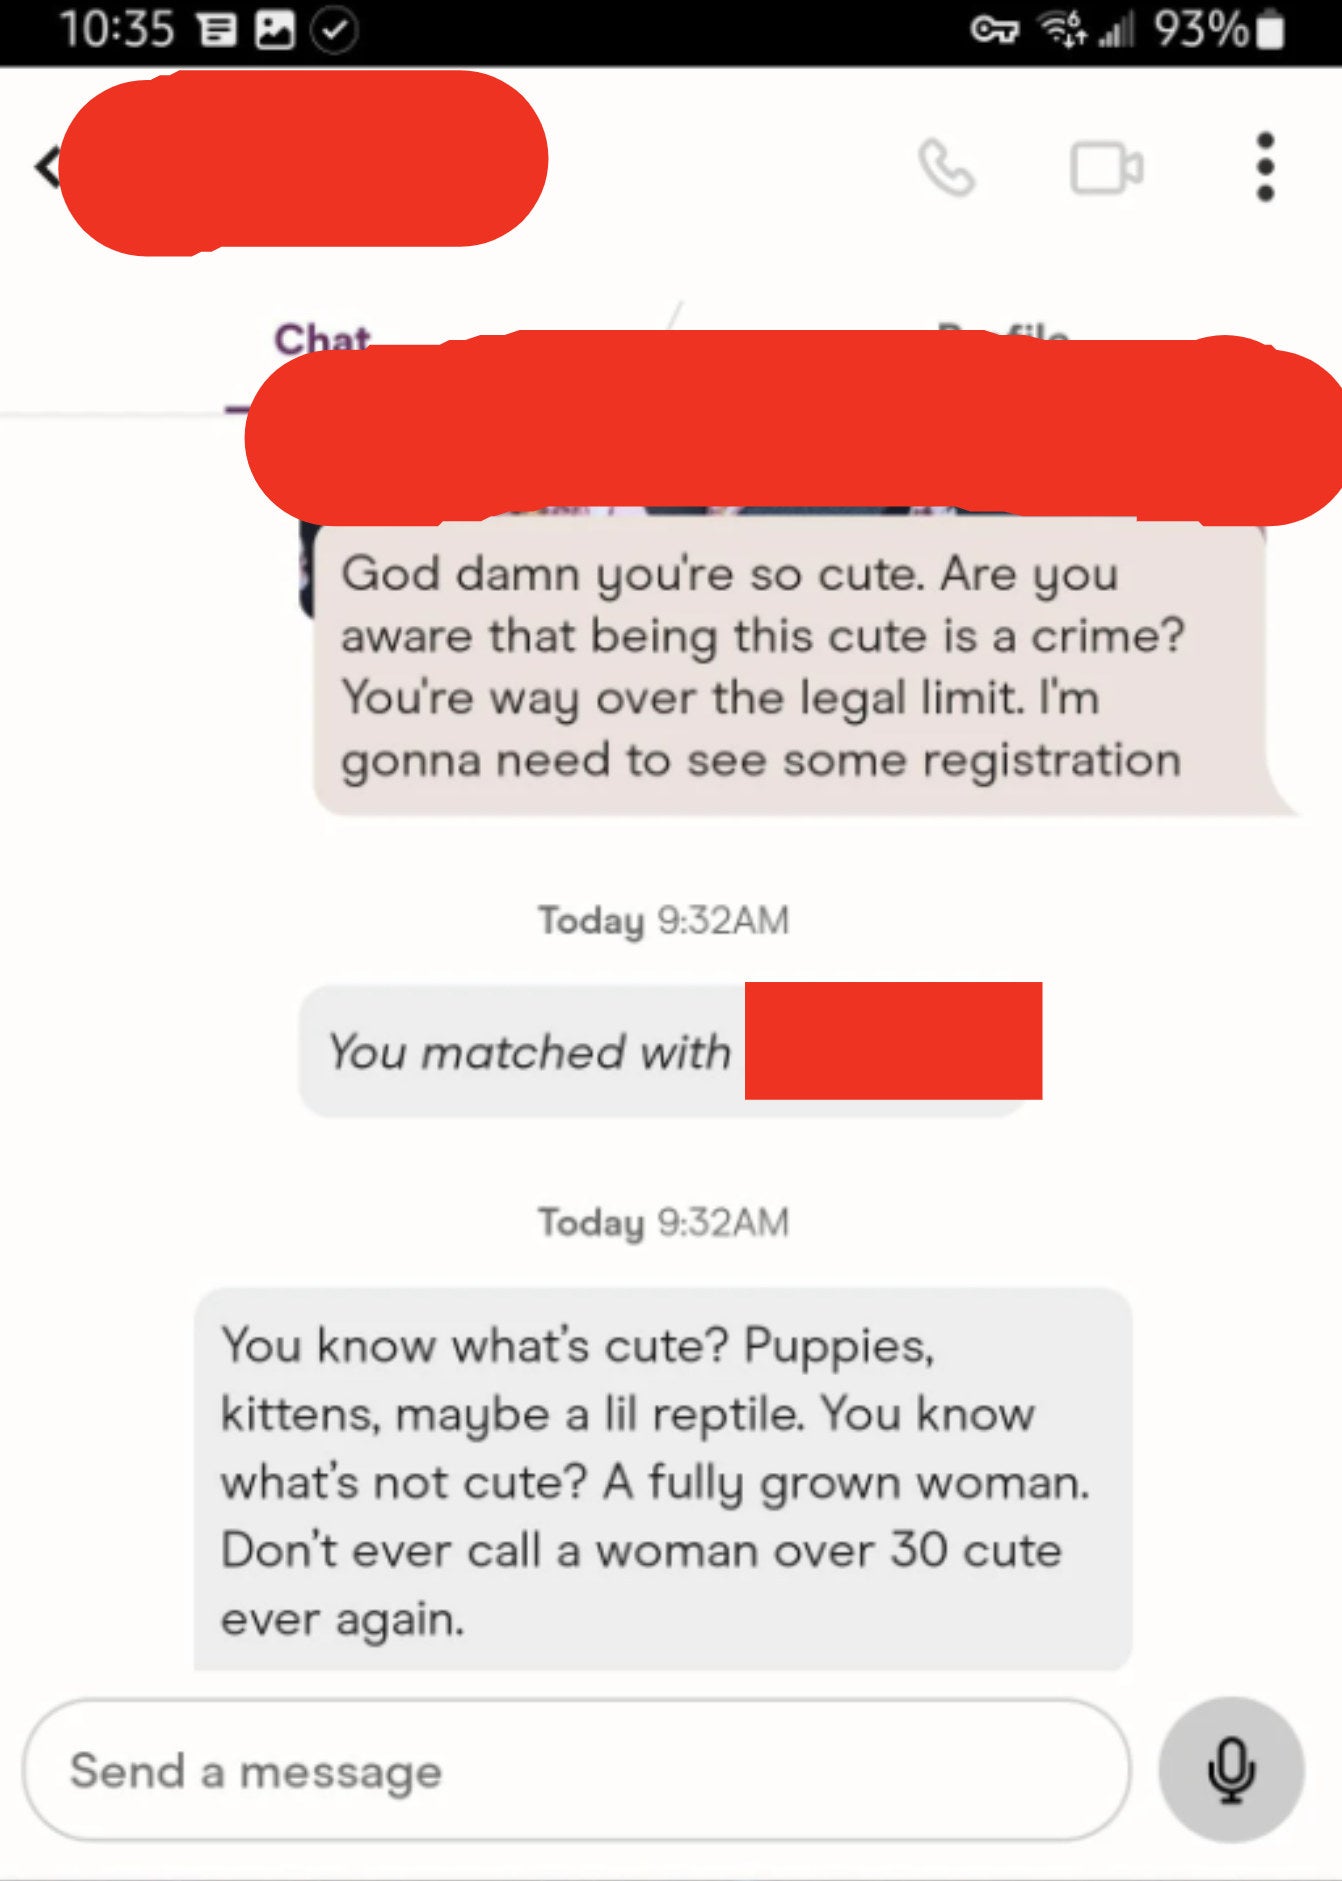 person 1 calls his match so cute that&#x27;s illegal and person 2 says to never call a grown woman over 30 cute